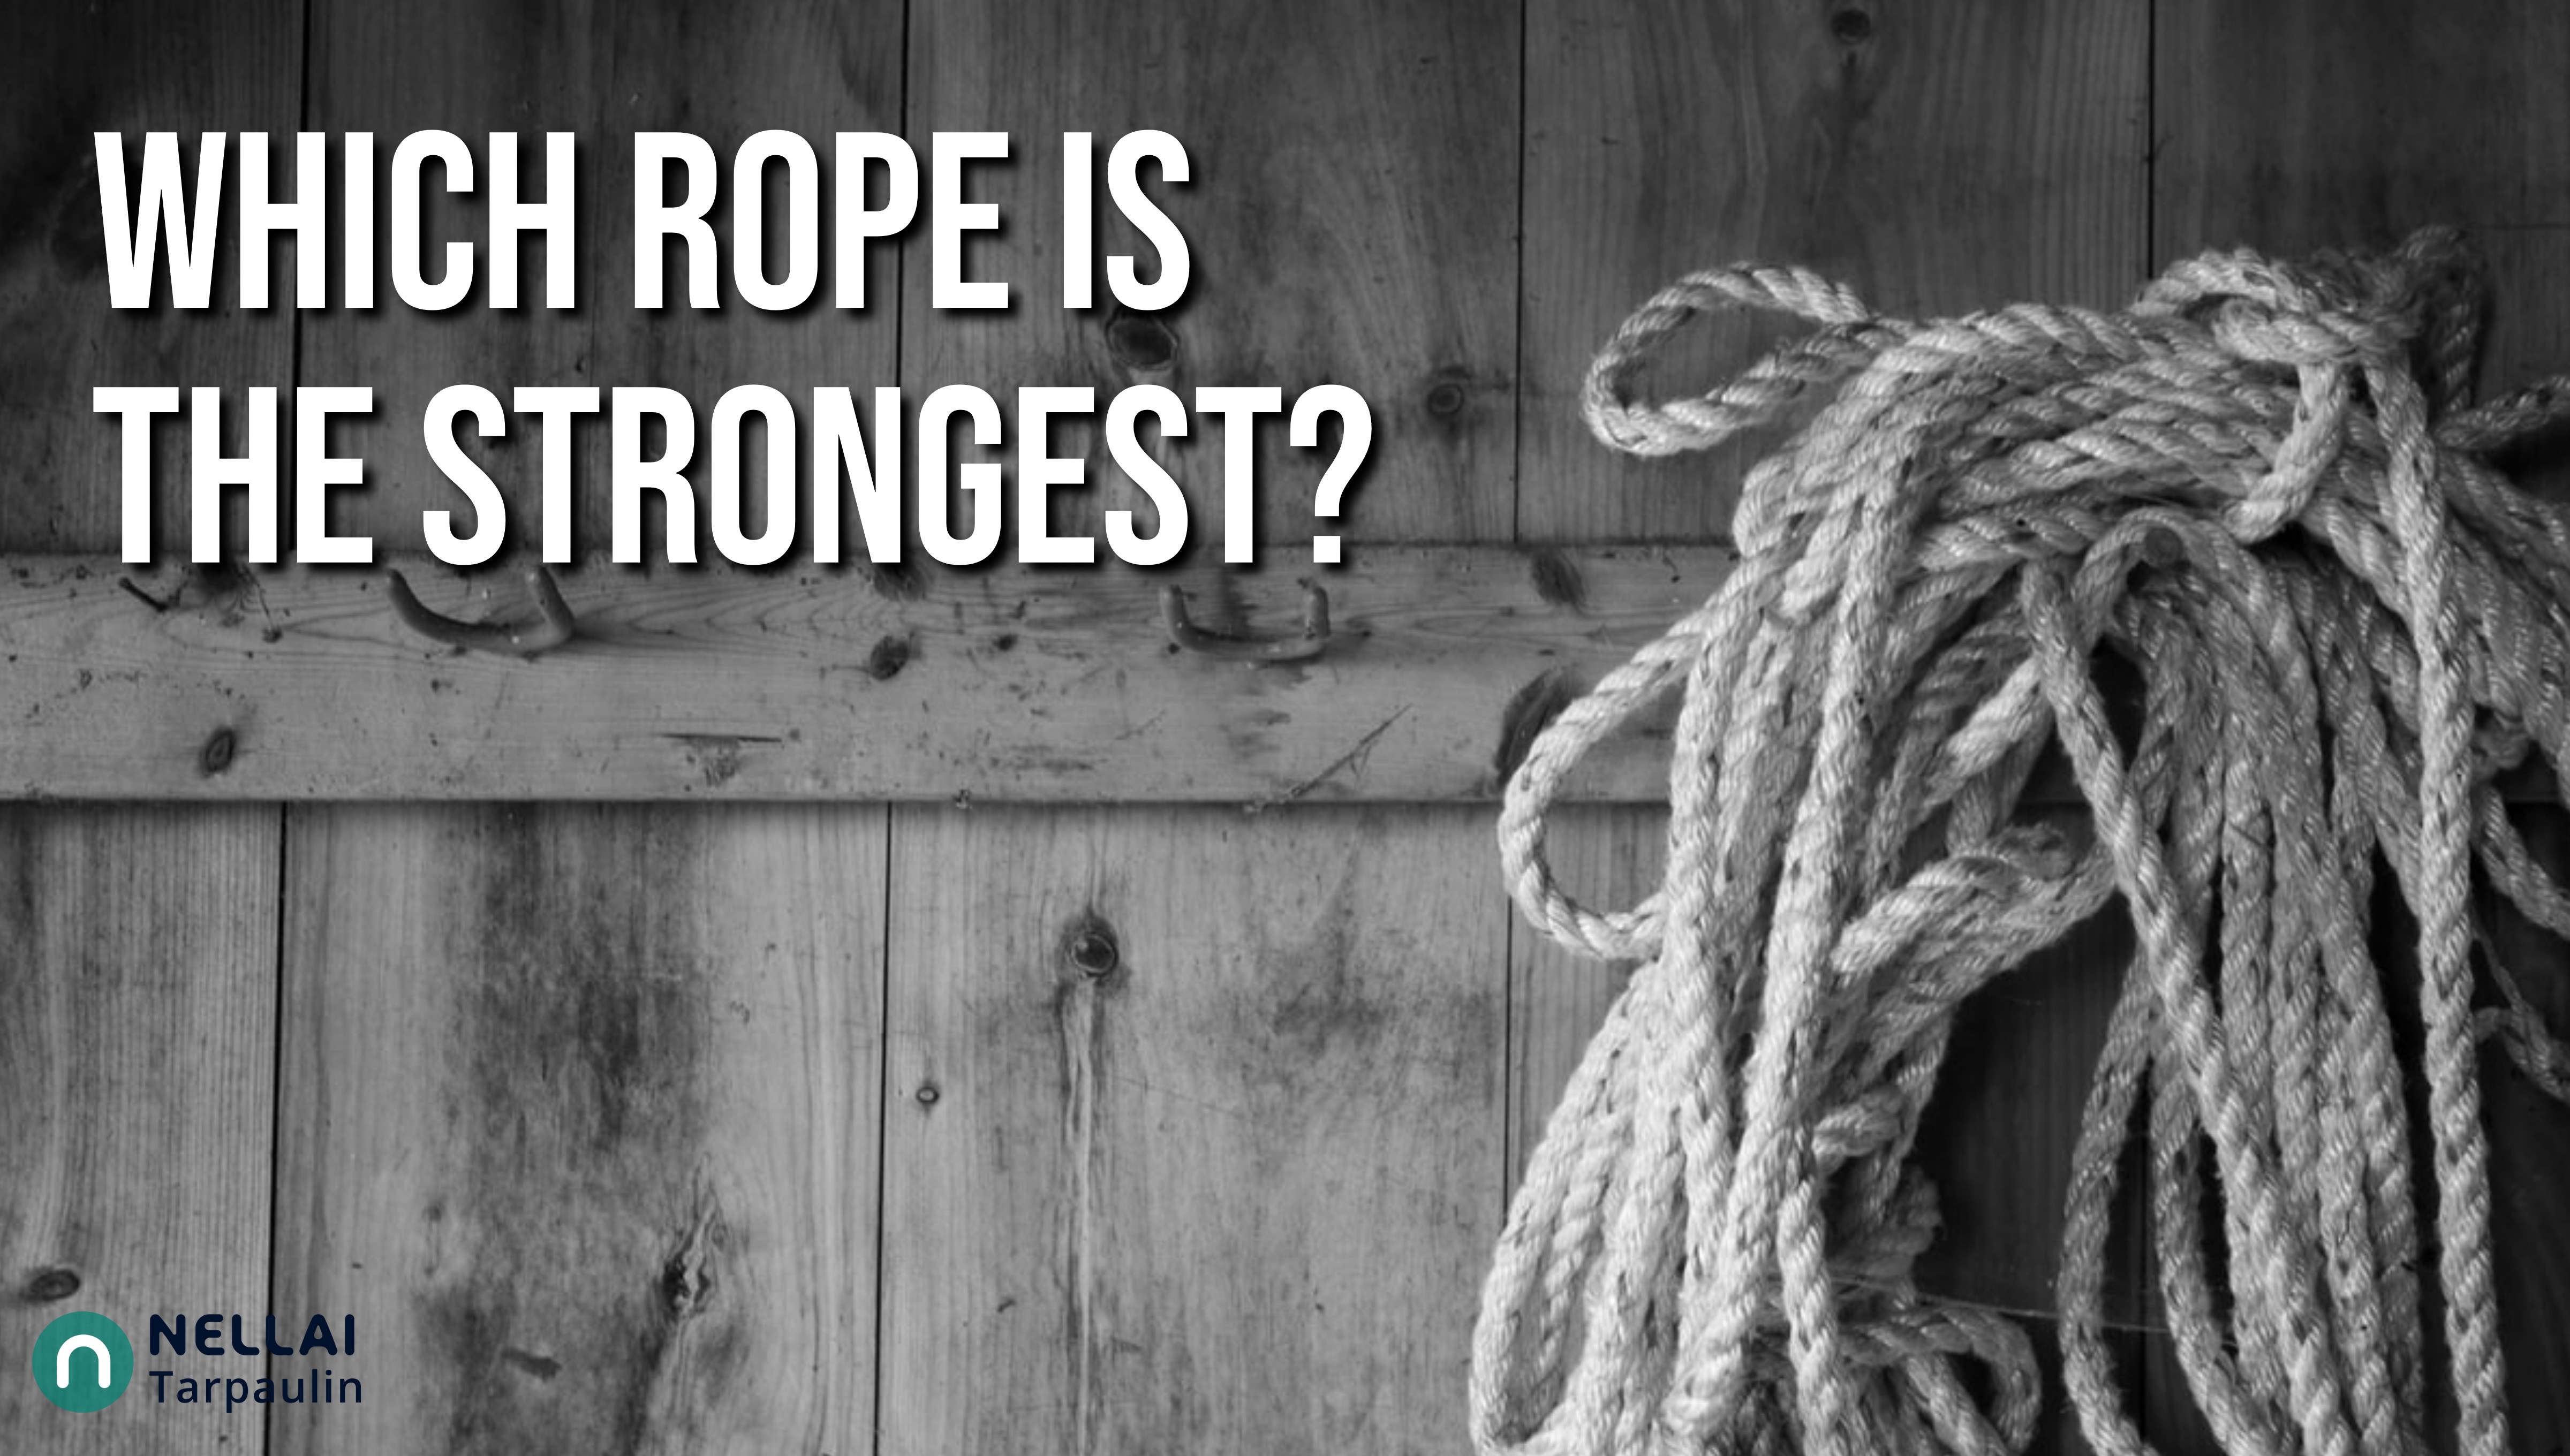 Which rope is the strongest?